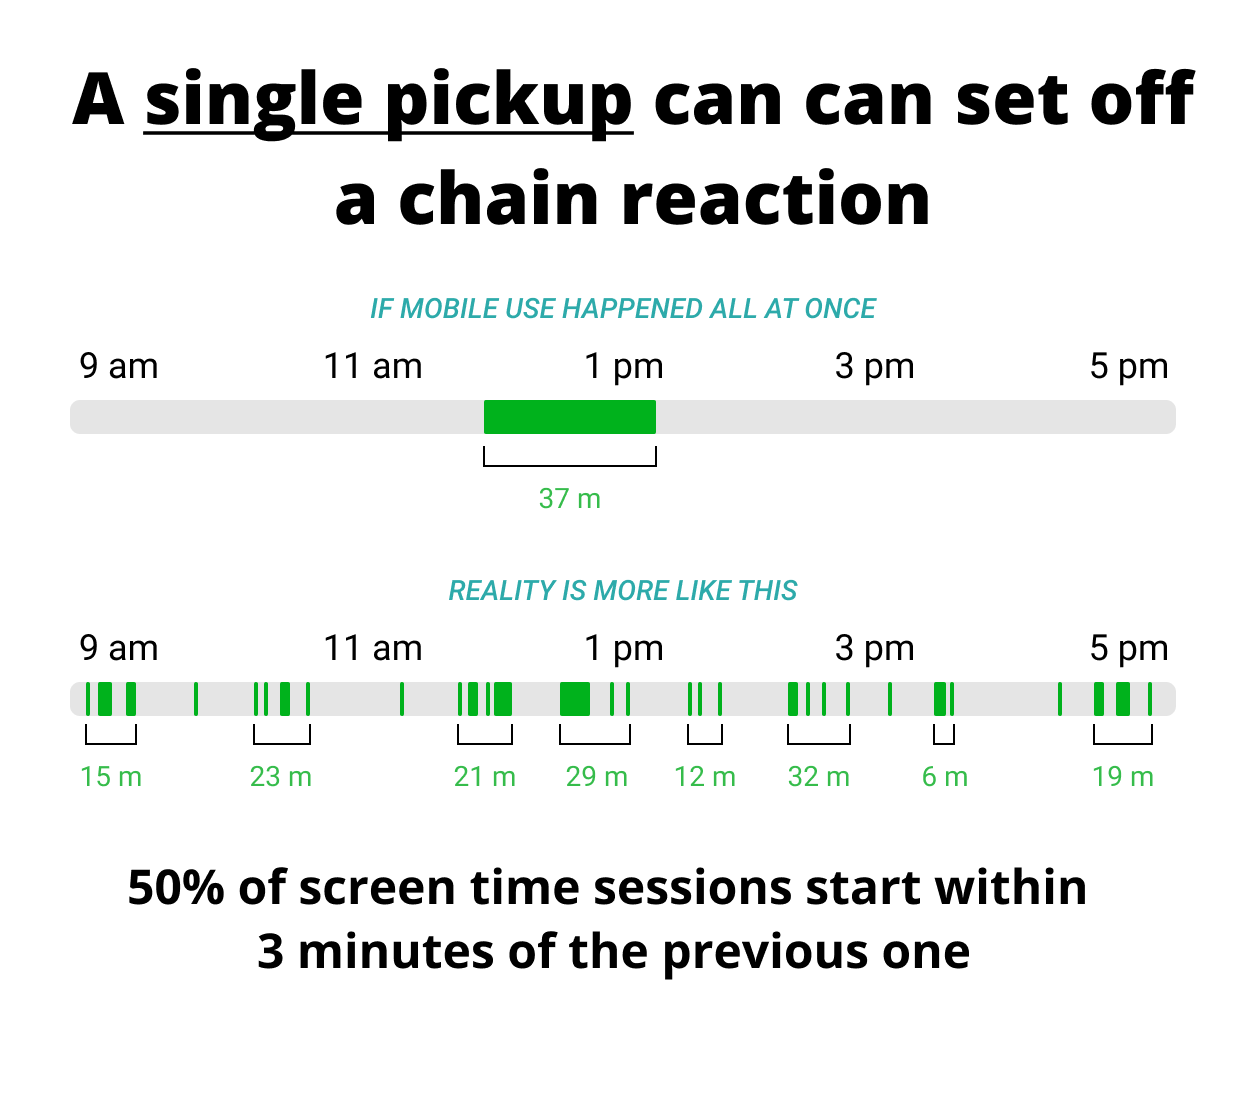 screen time stats - timeline of pickups